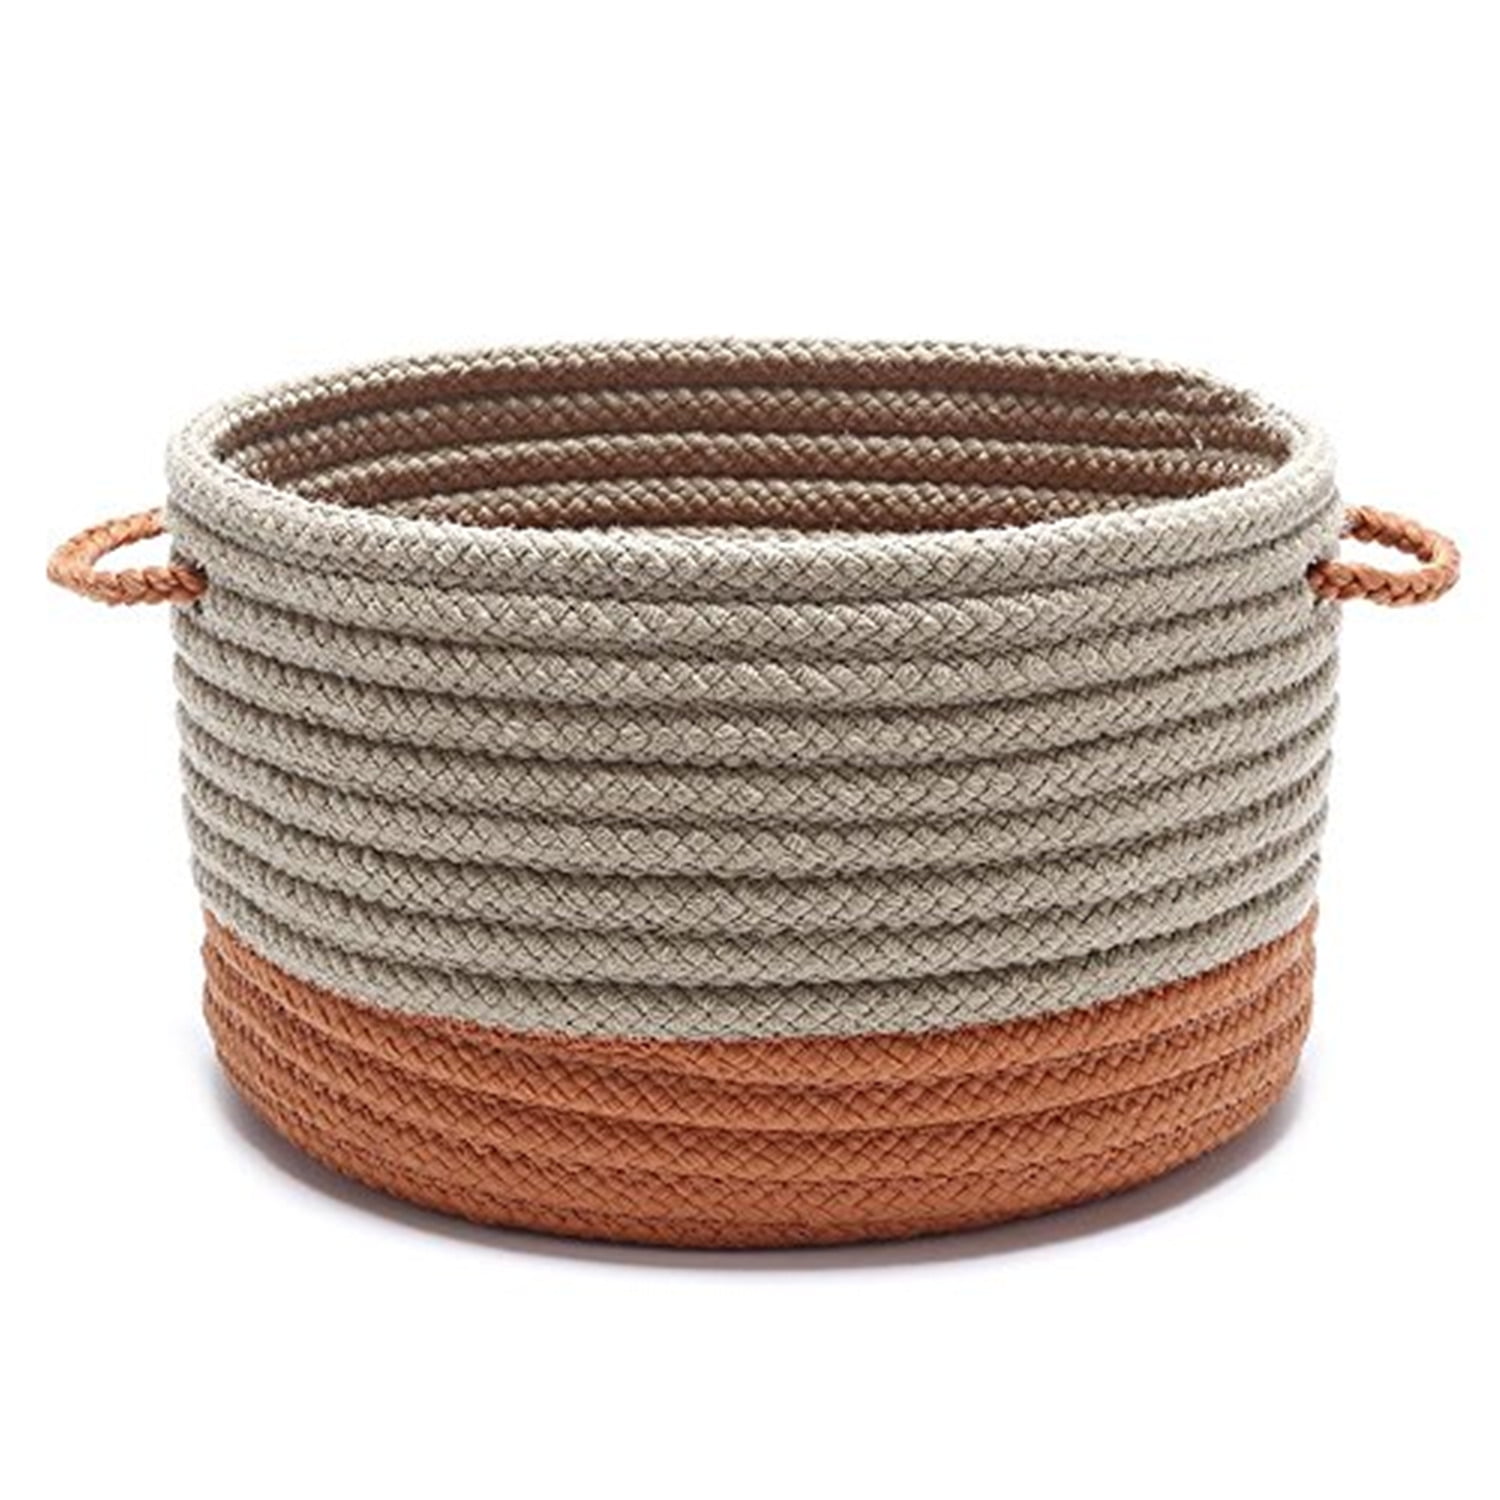 Picture of Colonial Mills IN41A015X018 15 x 15 x 18 in. Marina Round Basket, Orange & N150